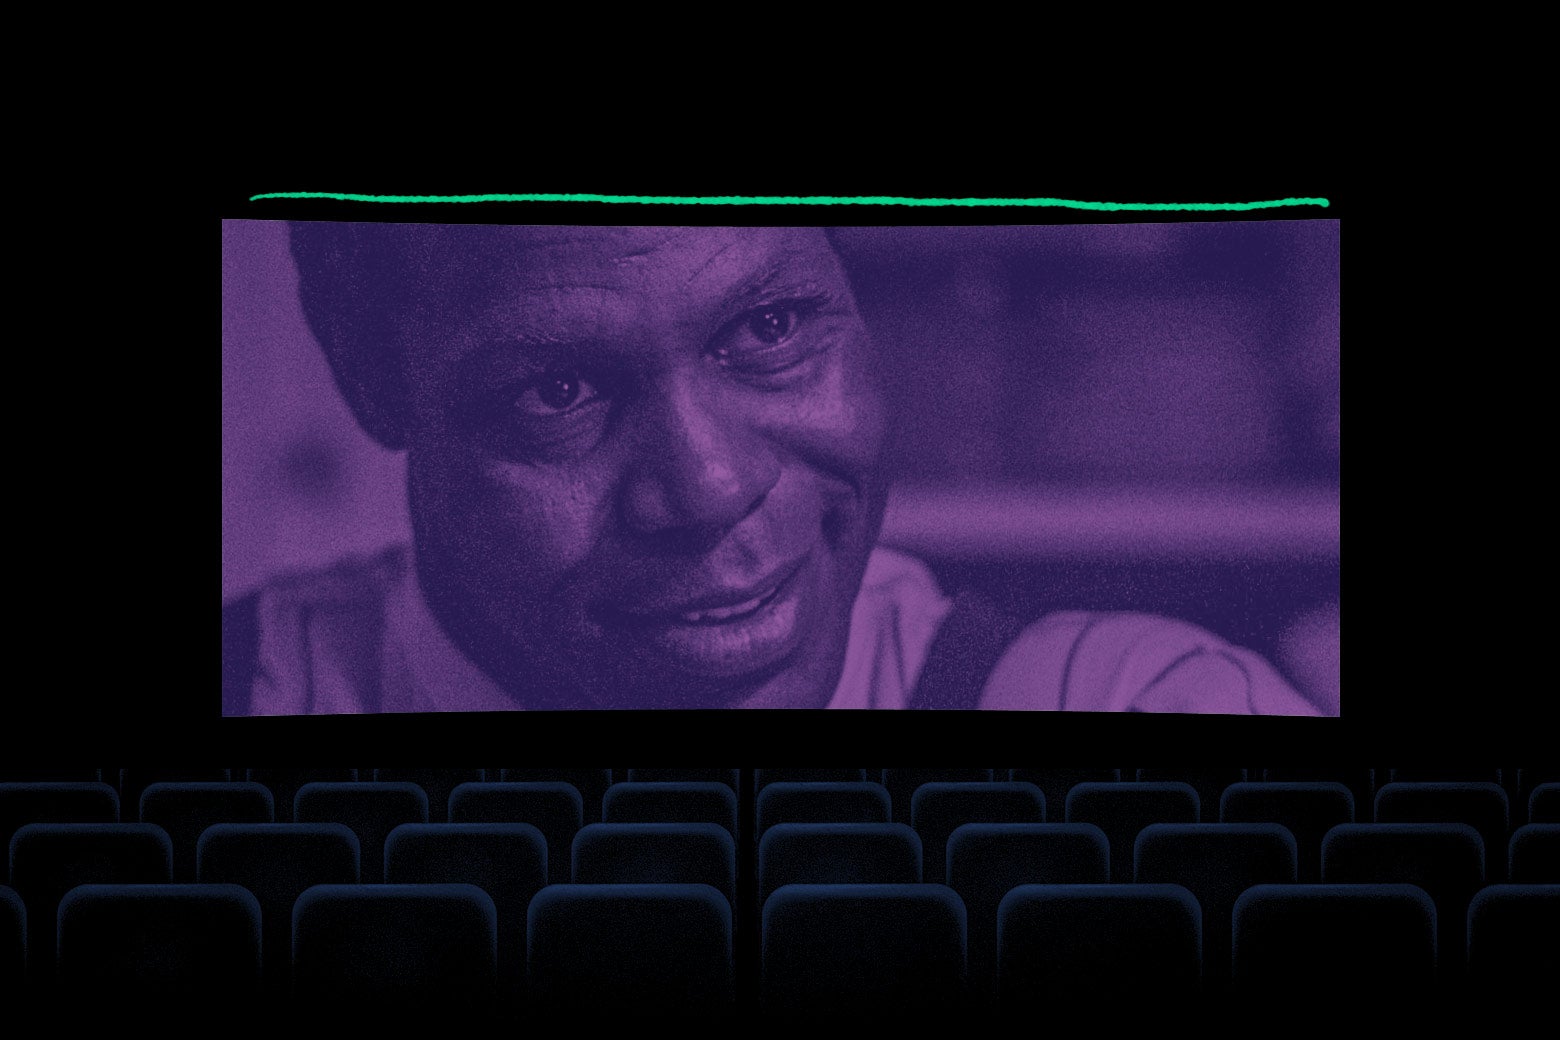 An empty movie theater shows Danny Glover's face.